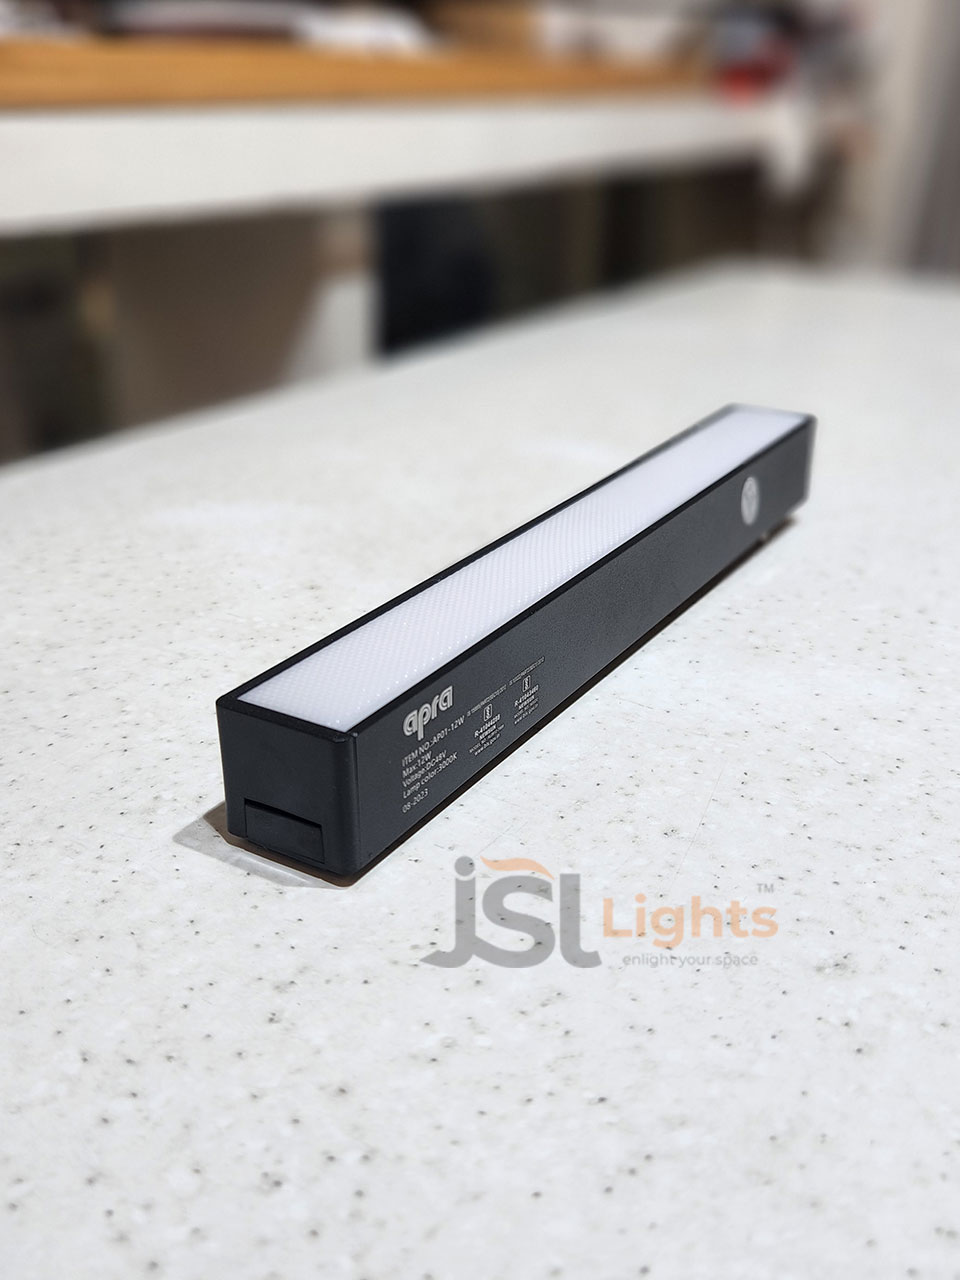 Apra 12W Ultra Thin Linear Diffused Magnetic Track Light MG01 SMD Diffuser Linear Ultra Slim Magnetic Track Light with Black Body